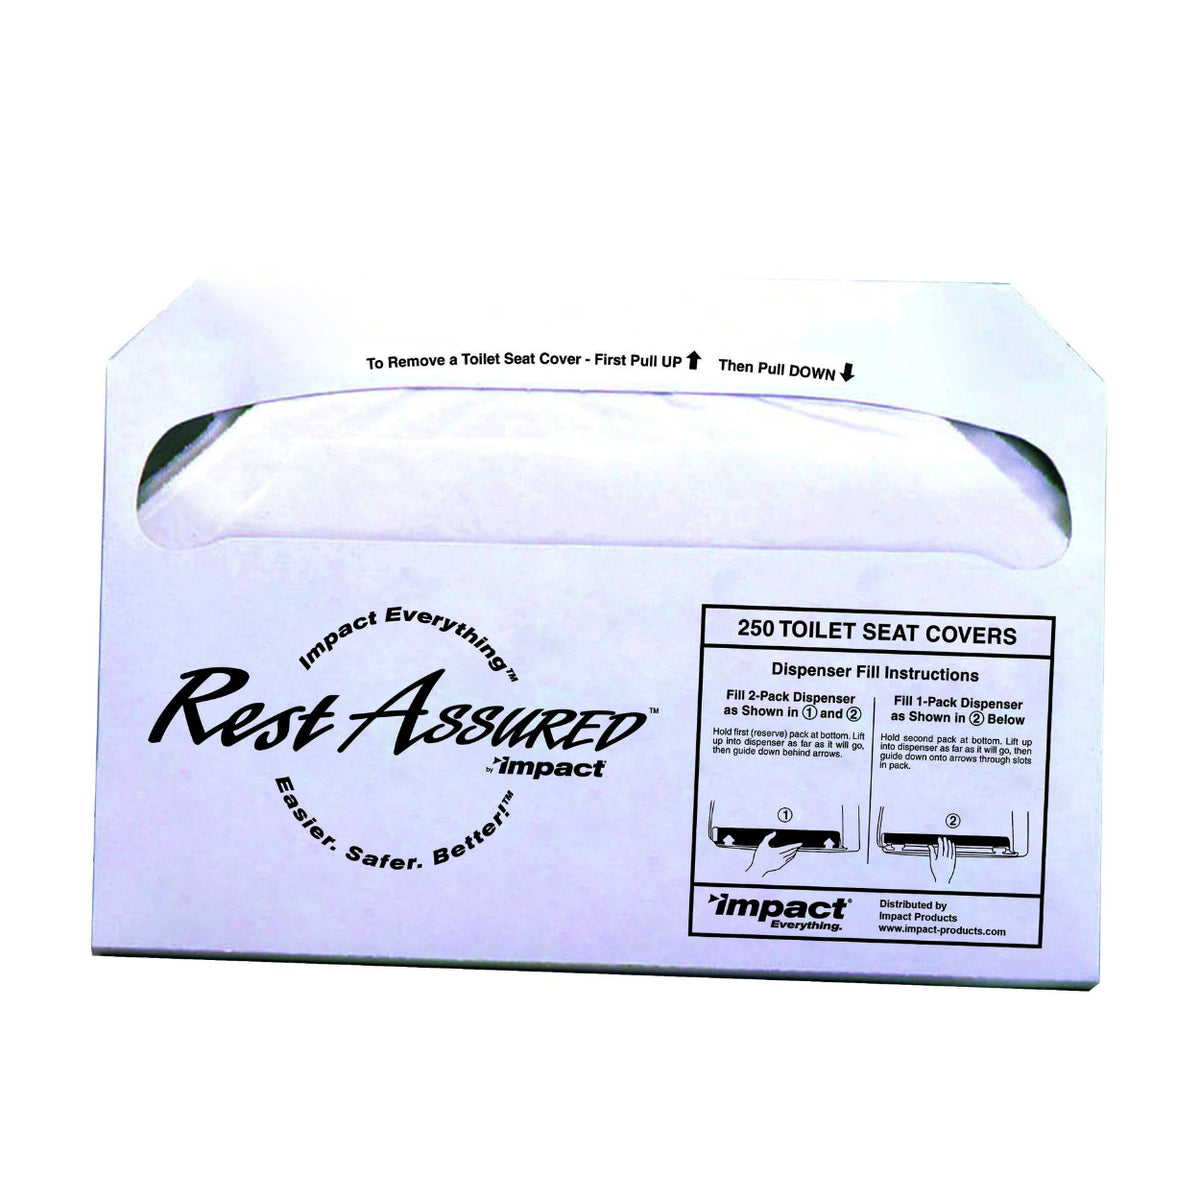 Impact 25177673 Rest Assured Biodegradable Toilet Seat Cover, White, 250-Count